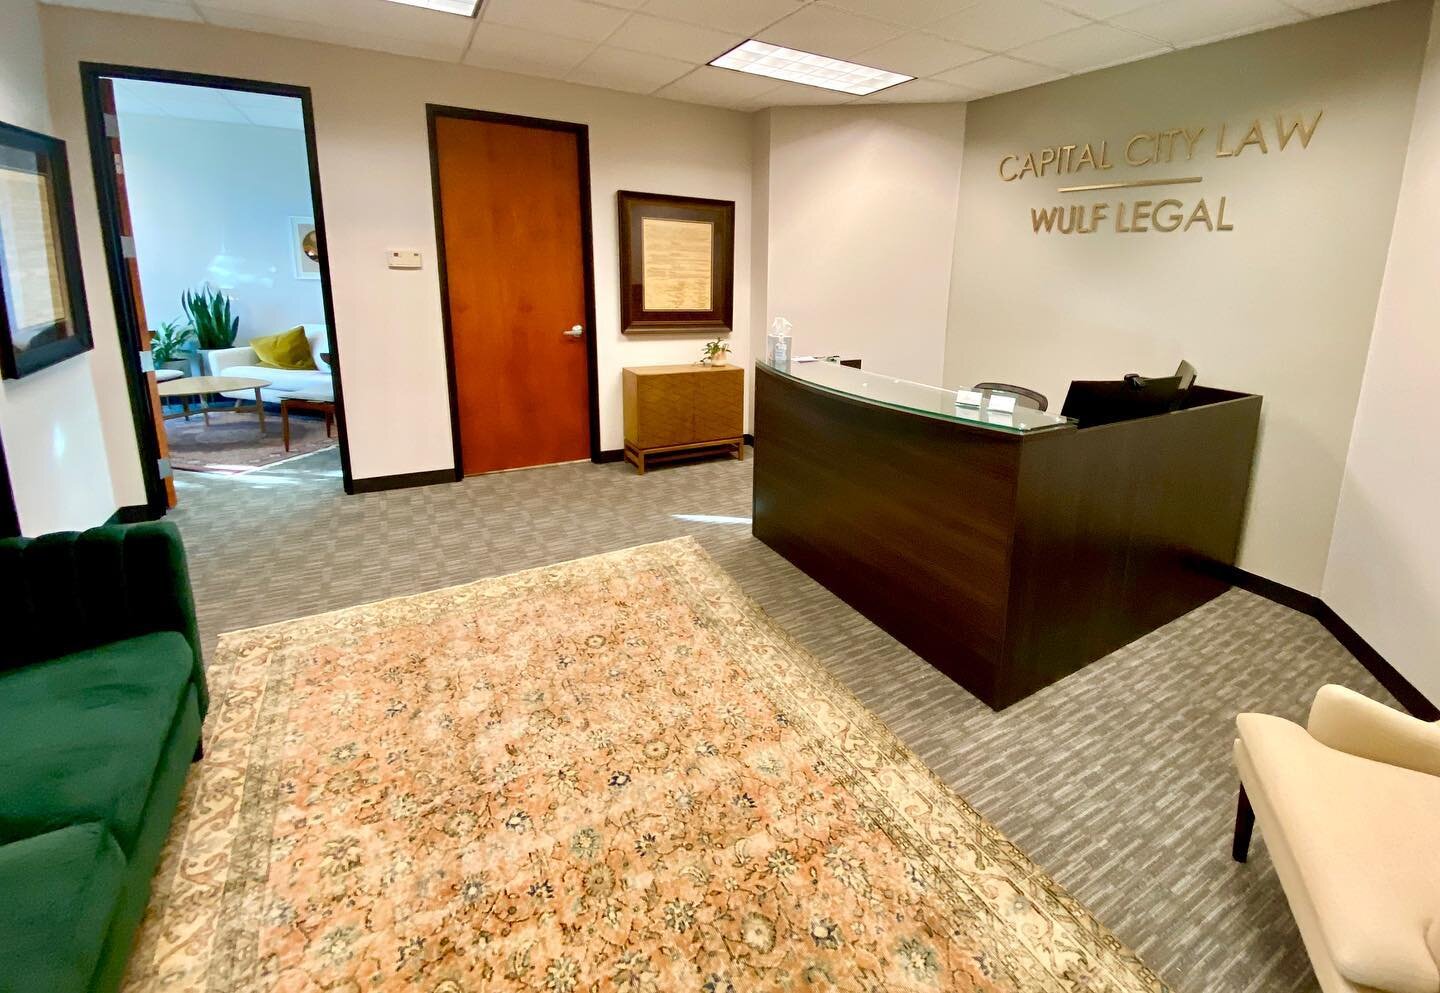 Wulf Legal has moved! Same building, new suite. Please come in and visit in order to discuss all of your estate planning needs. 
🌟
1673 W Shoreline Dr, Suite 260, Boise.